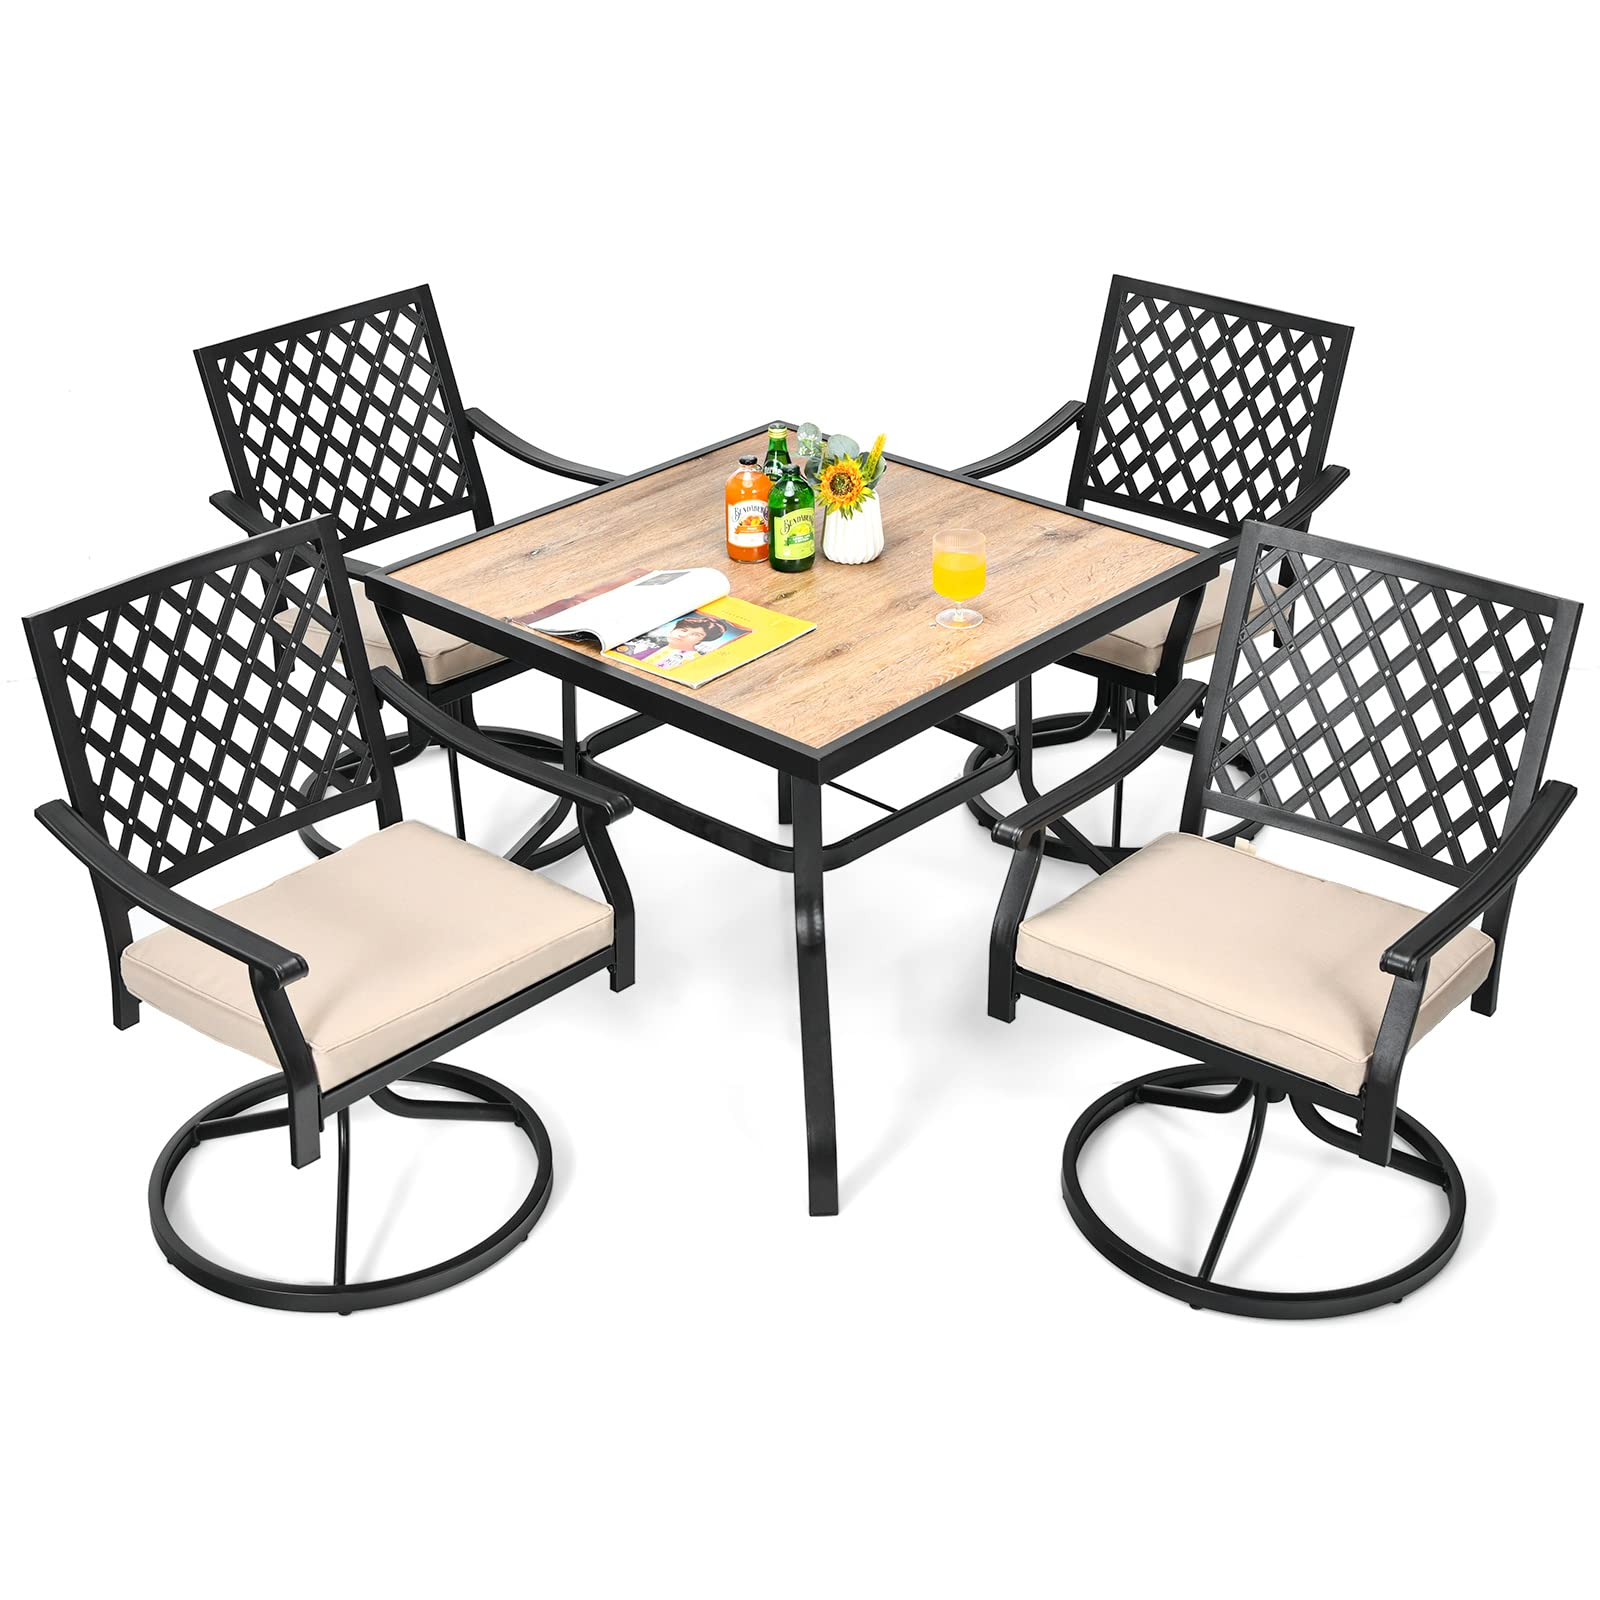 Giantex 2 or 4 Pack Swivel Outdoor Chairs, Patio Dining Rocking Chairs